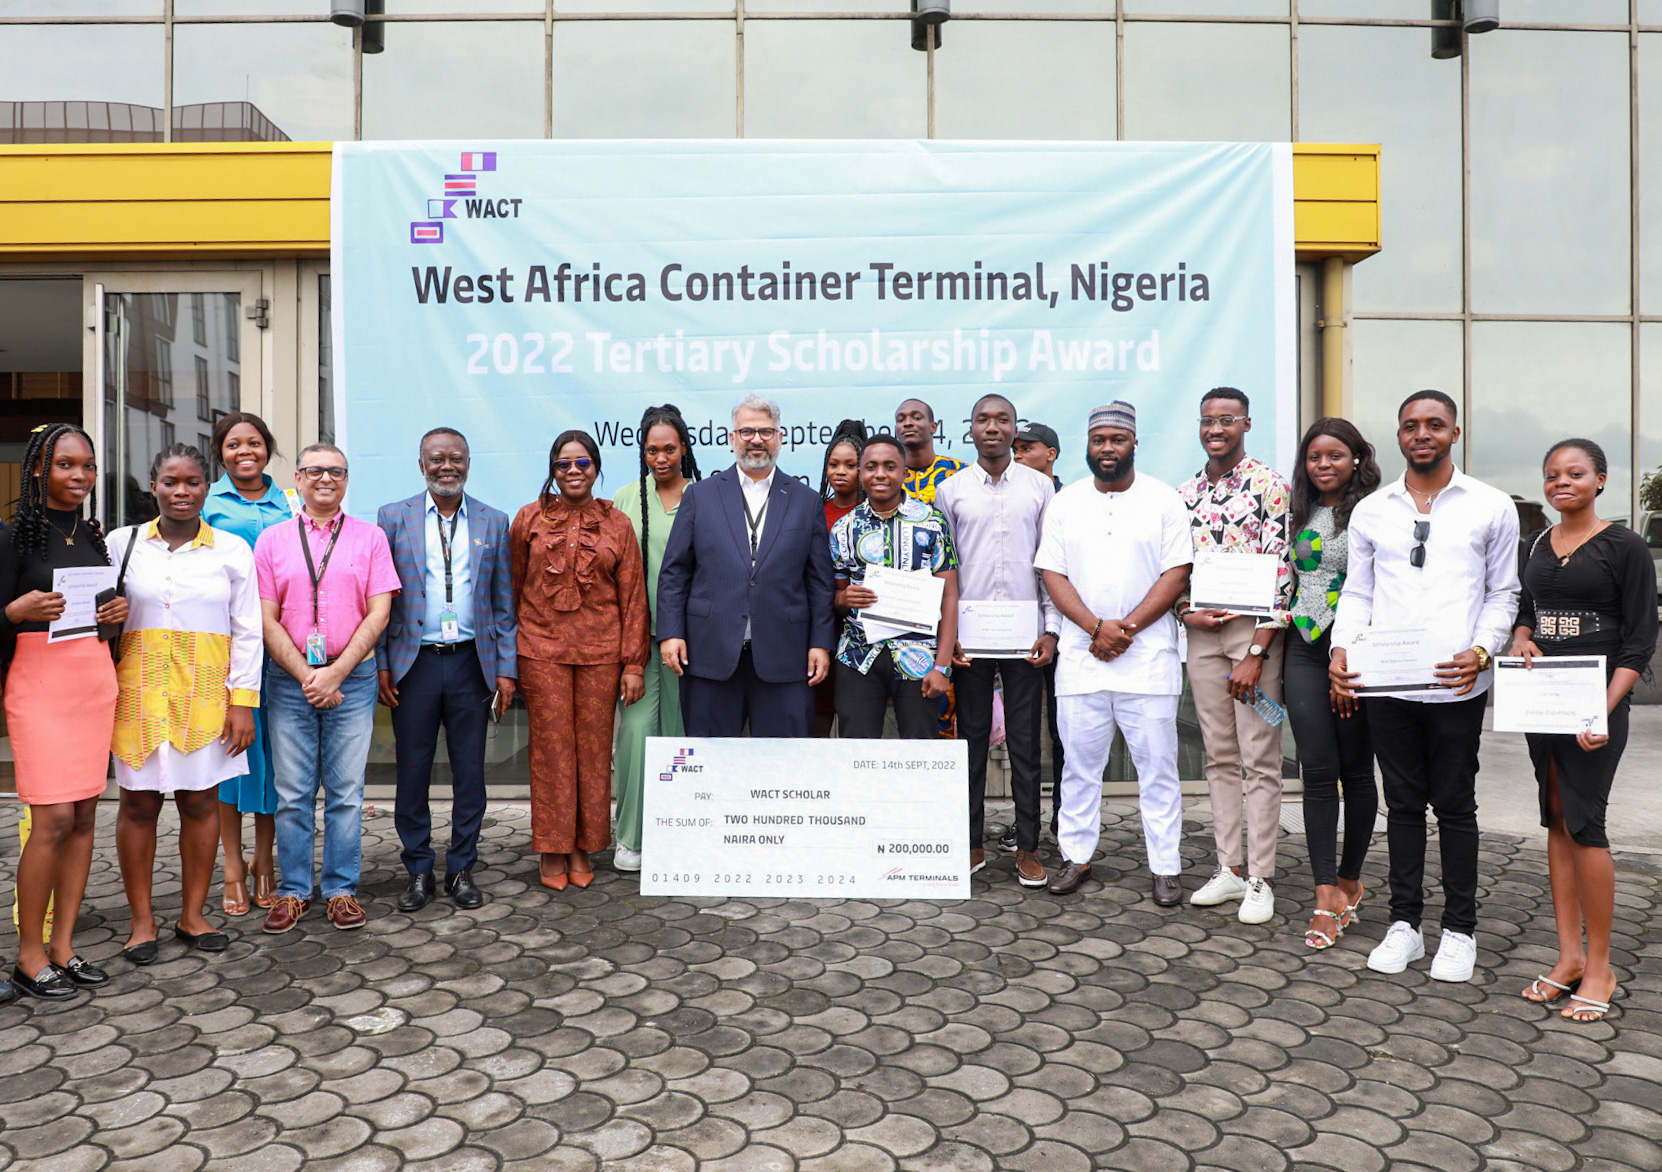 Nigeria : West Africa Container Terminal awards N30 million worth of scholarships to 50 undergraduate students